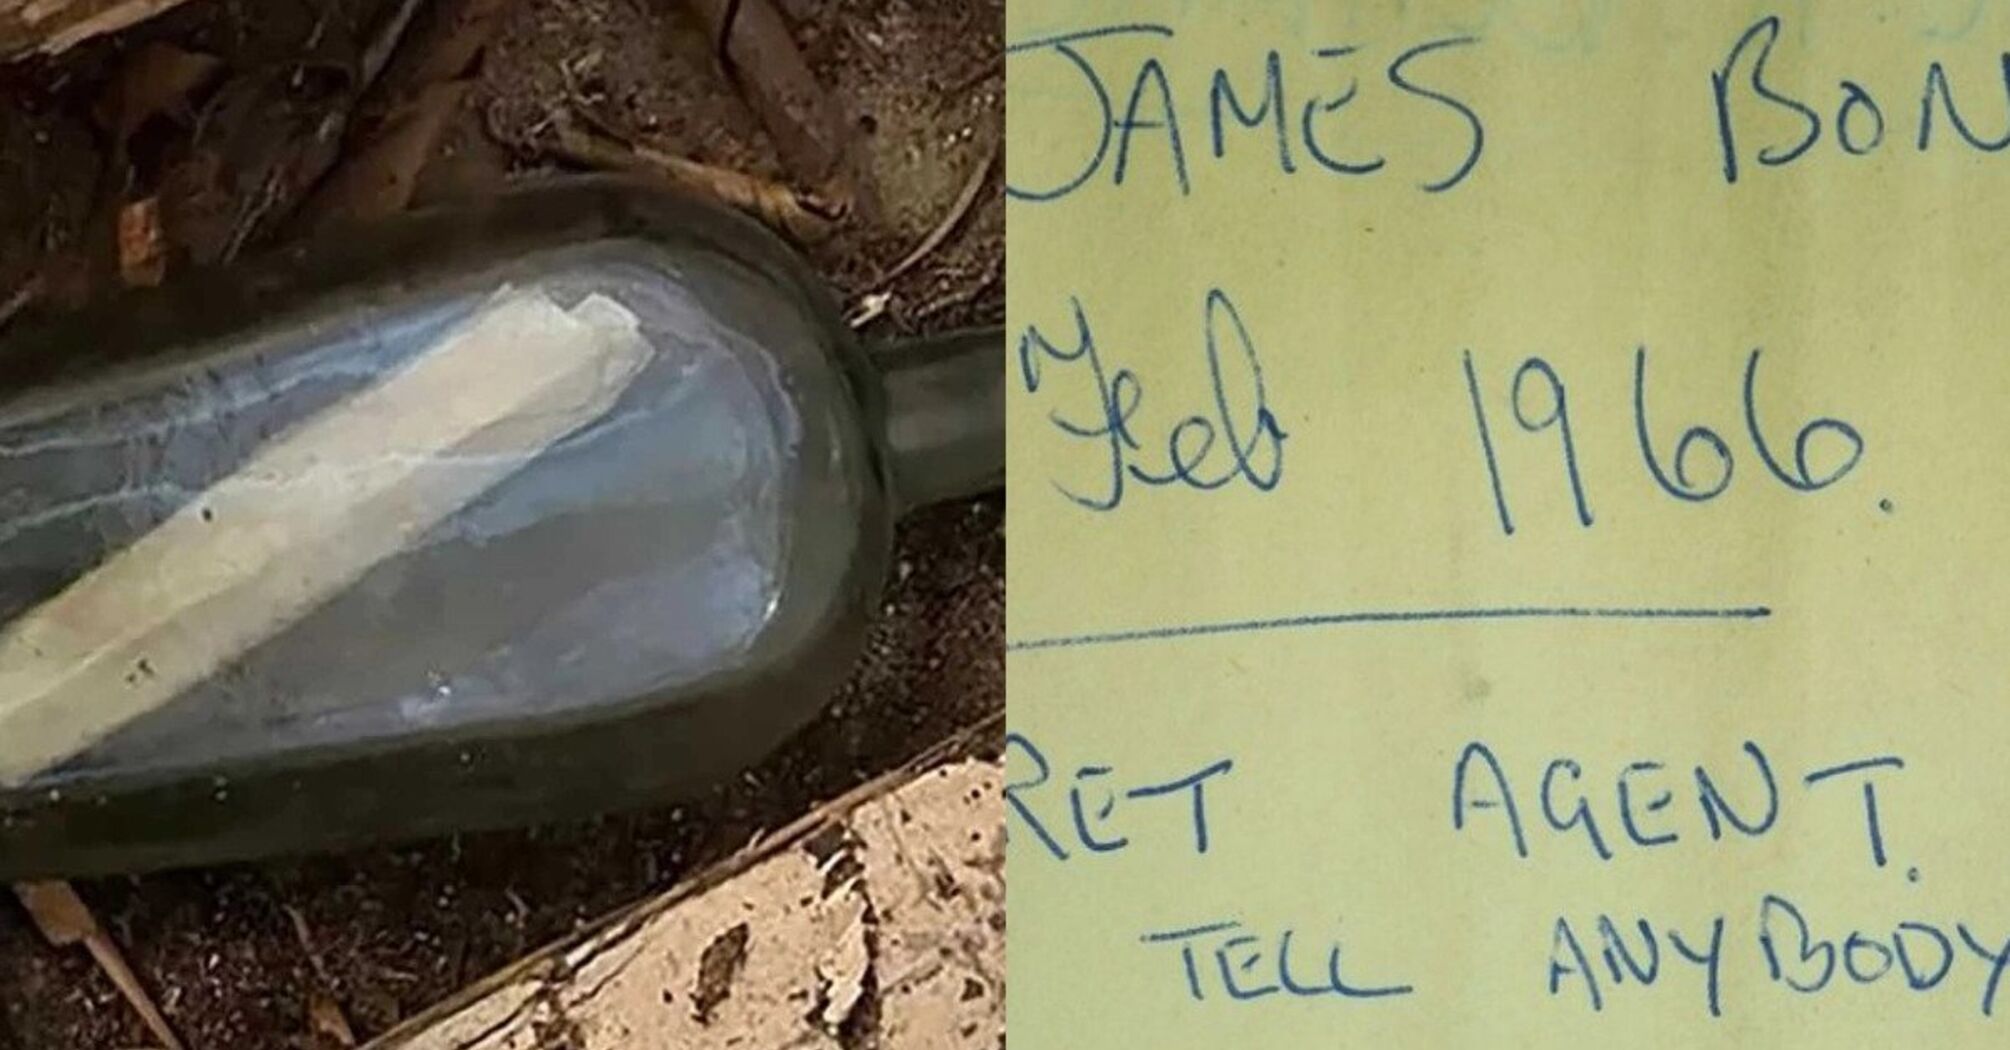 A bottle with a 1966 message from James Bond was found in the castle 